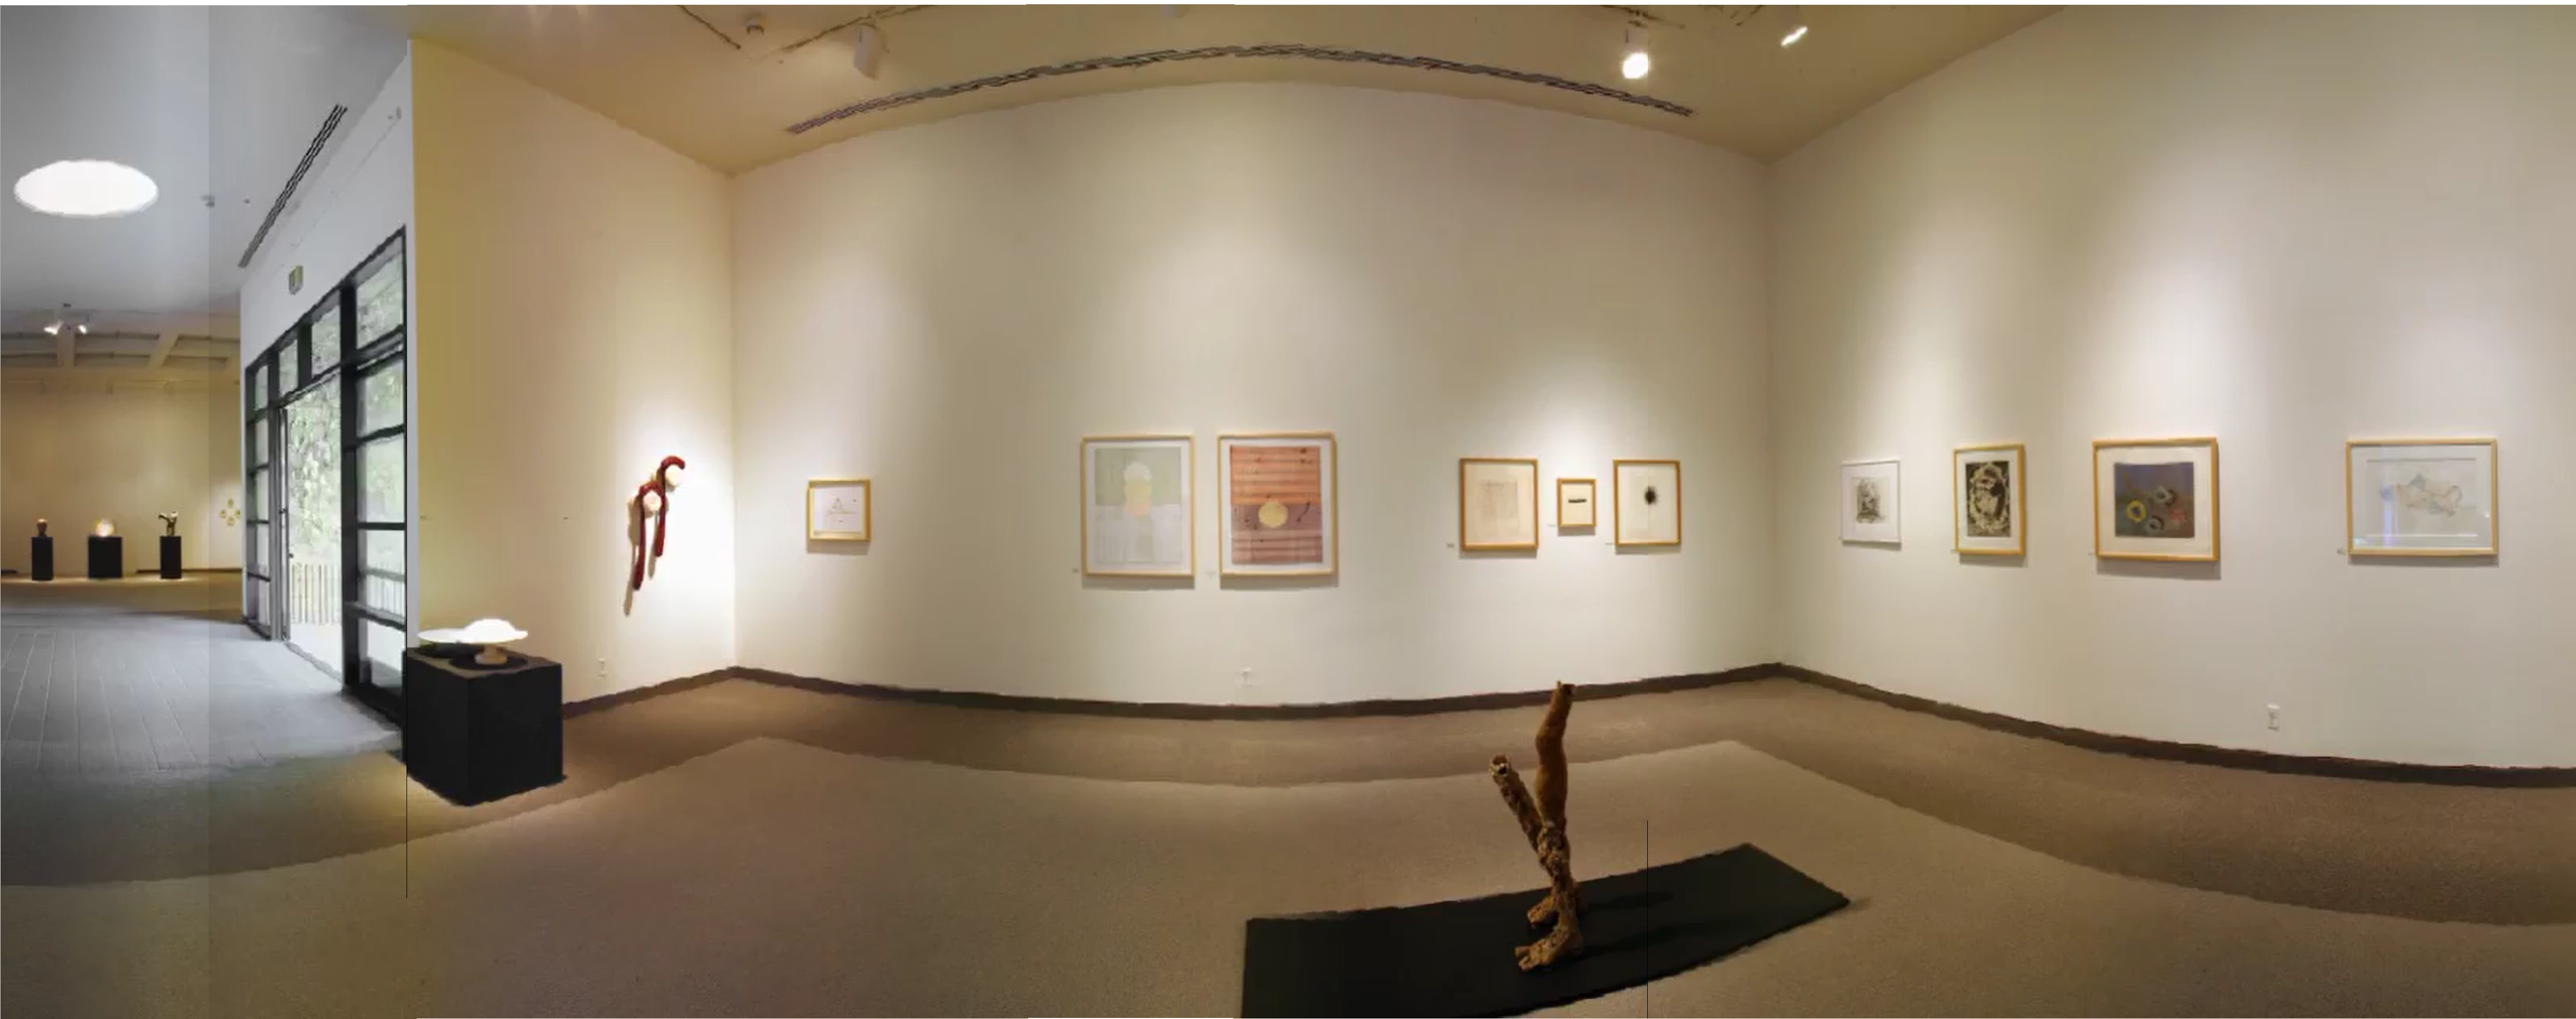 Installation View, Front East Gallery, Ink & Clay 29 Exhibition, January 06, 2003 to February 14, 2003